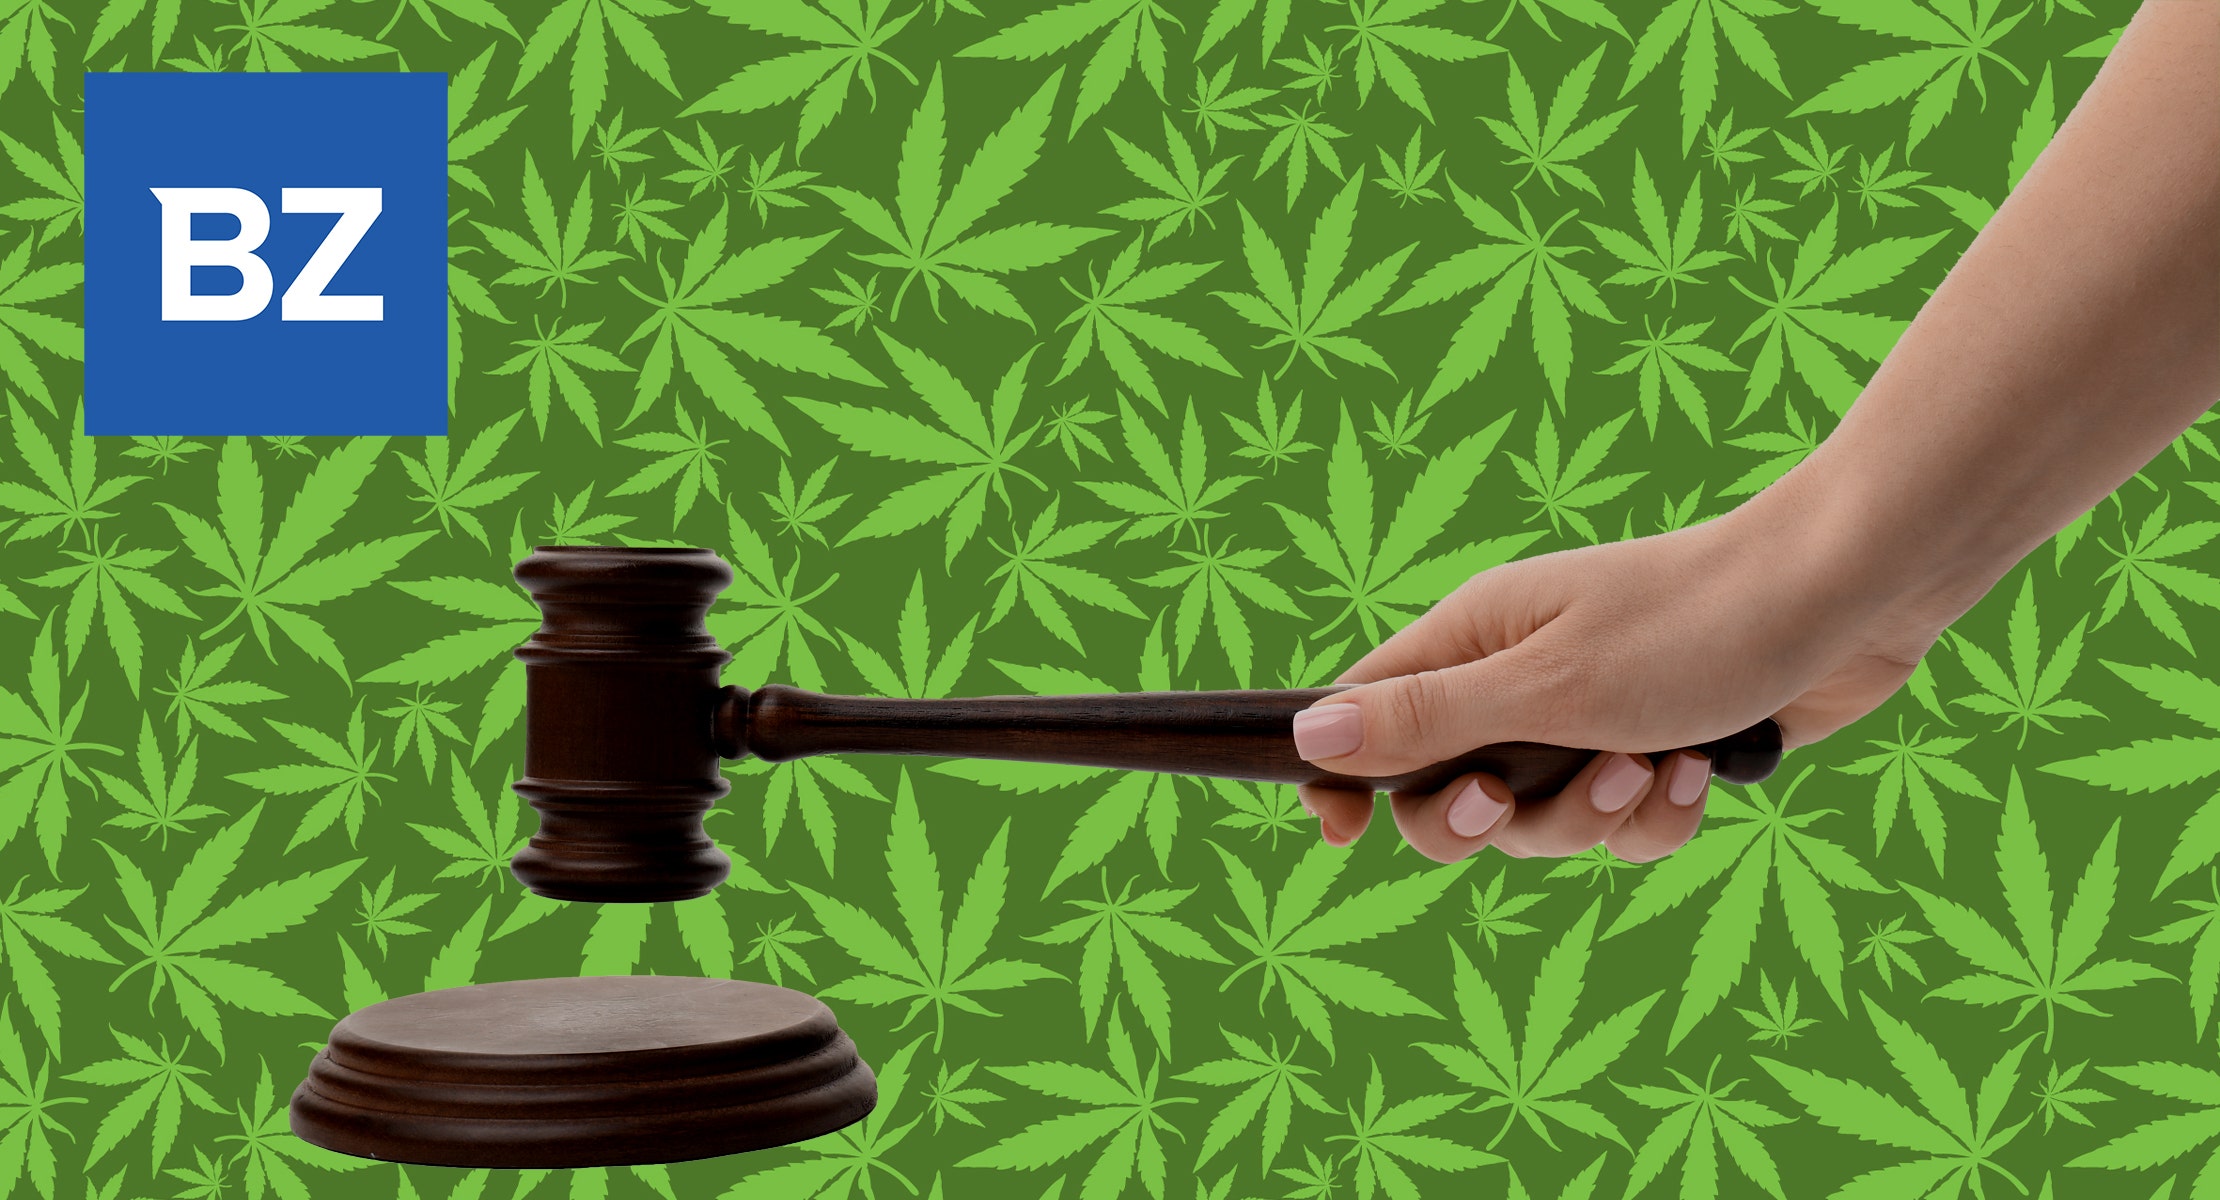 Illinois Considers Weed Delivery, Missouri Marijuana Legalization Takes Effect, Philippines Senator Push For MM, & More